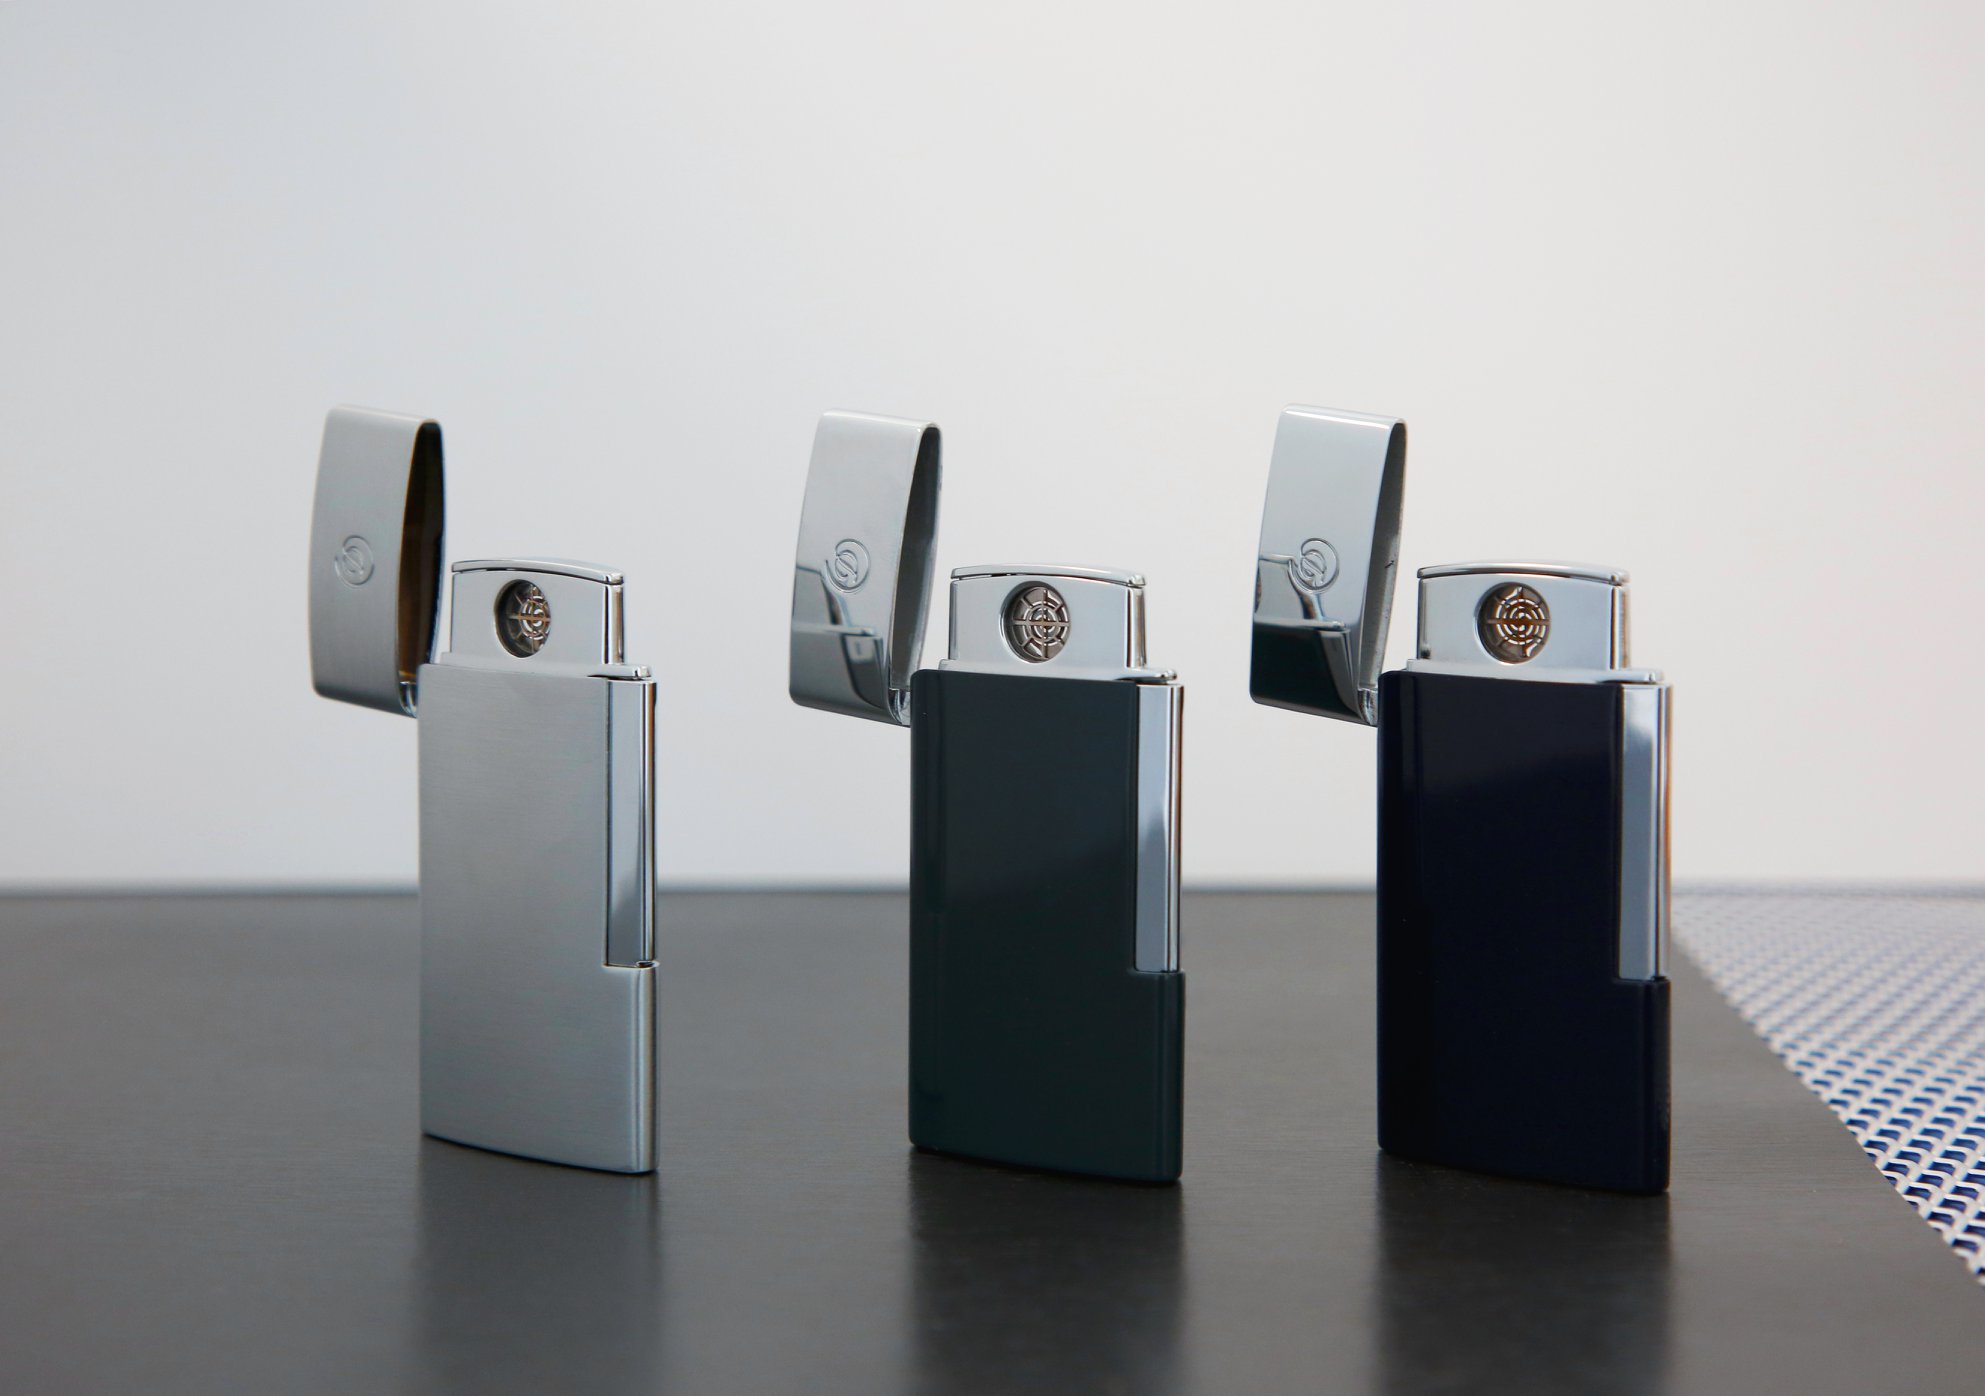 “Eslim” the electric lighter that fits our times and fits your life. Brushed chome, grey or dark-blue, which one would you choose?